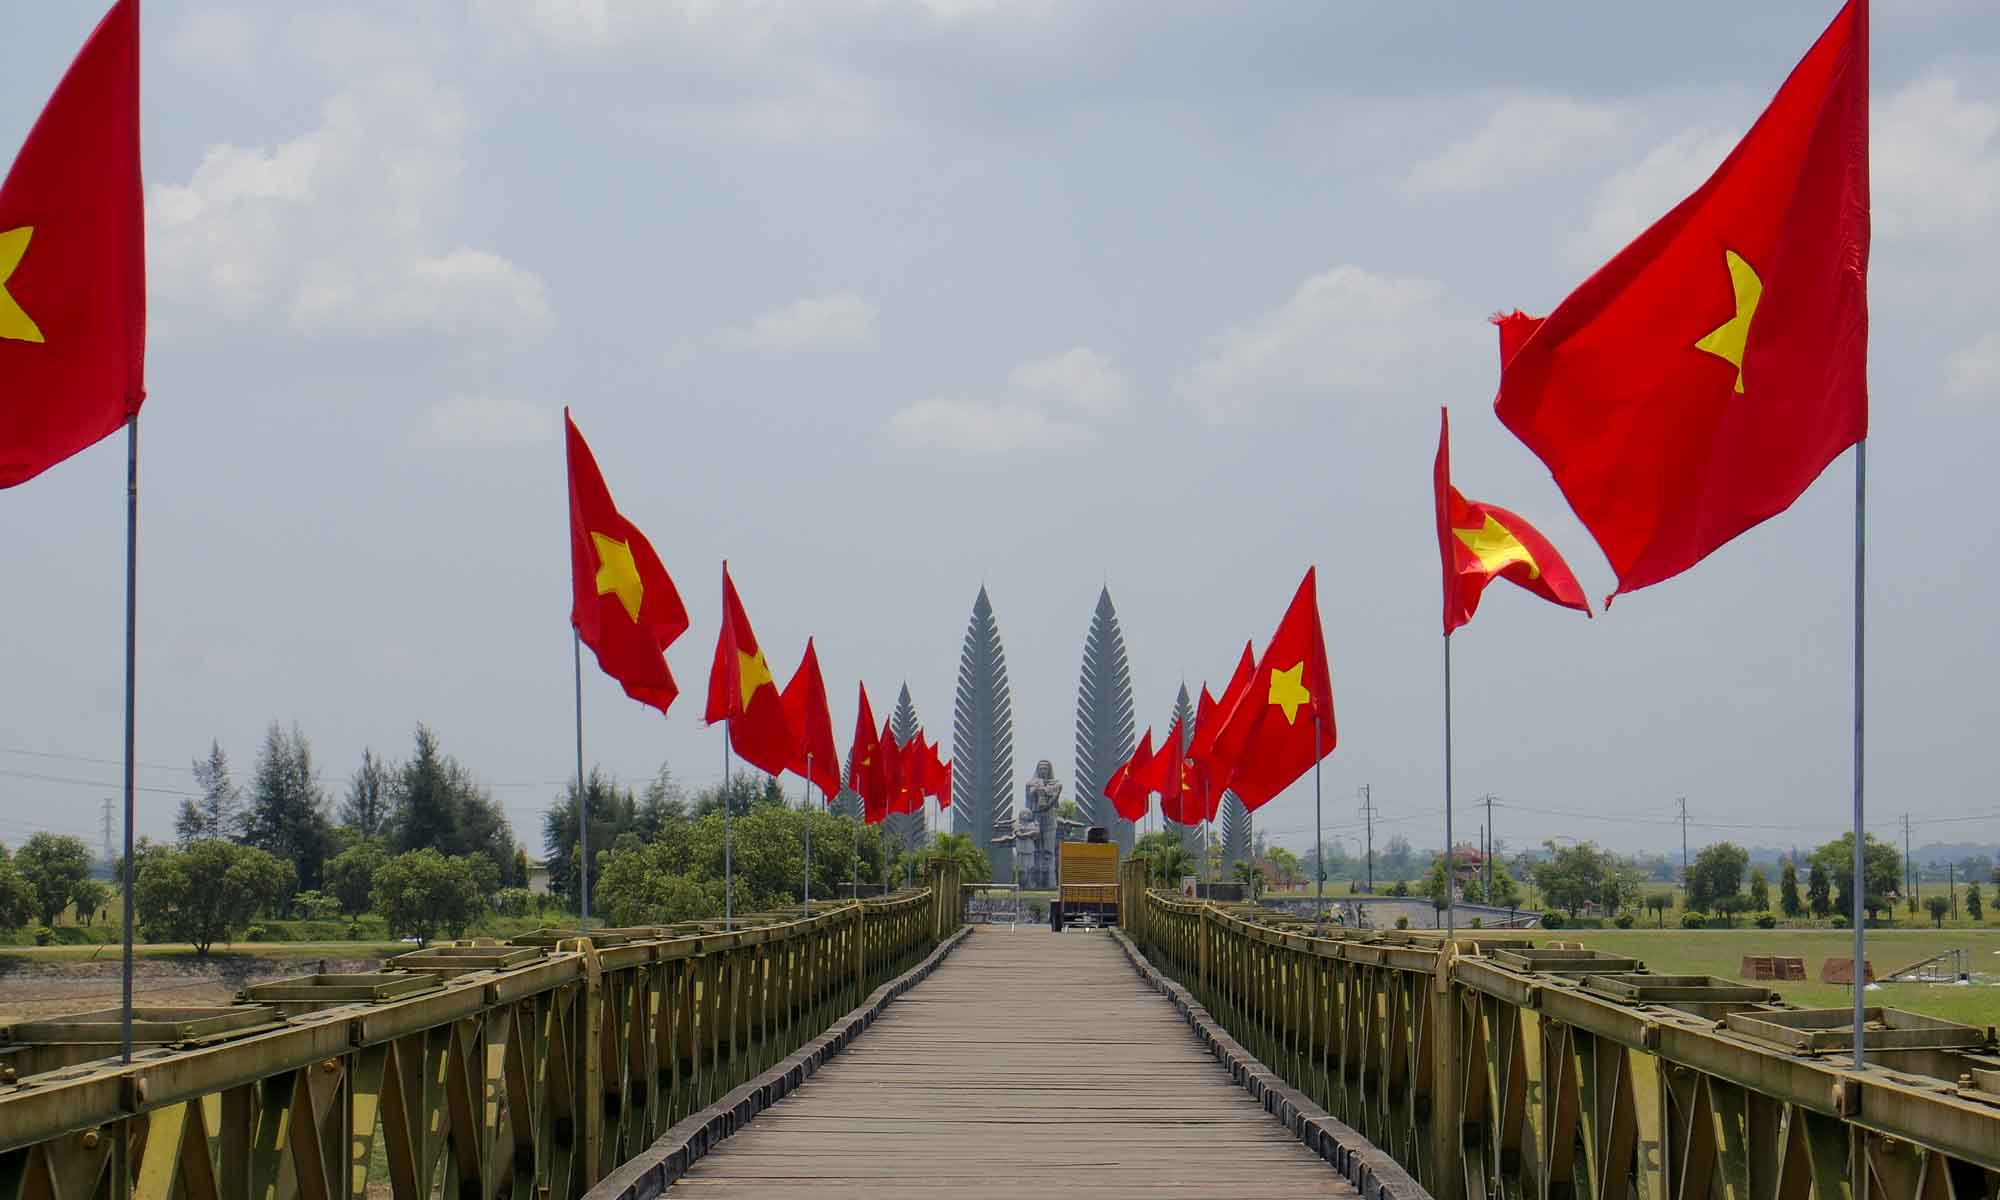 The bridge with the monument in the background